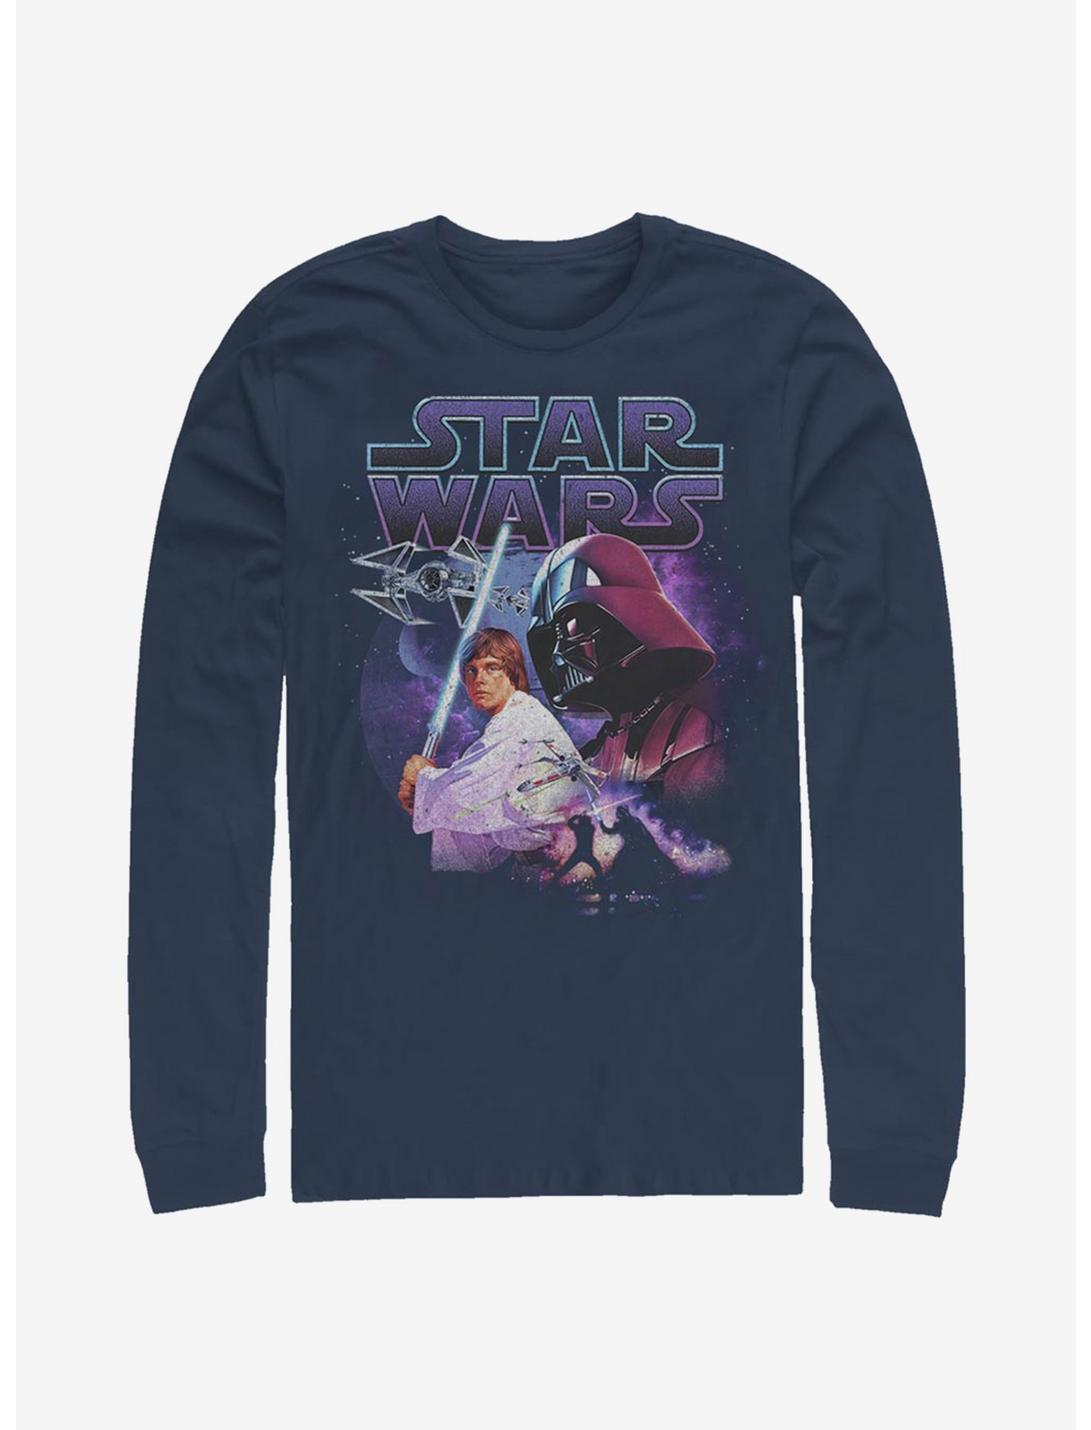 Star Wars Father Son Long-Sleeve T-Shirt, NAVY, hi-res